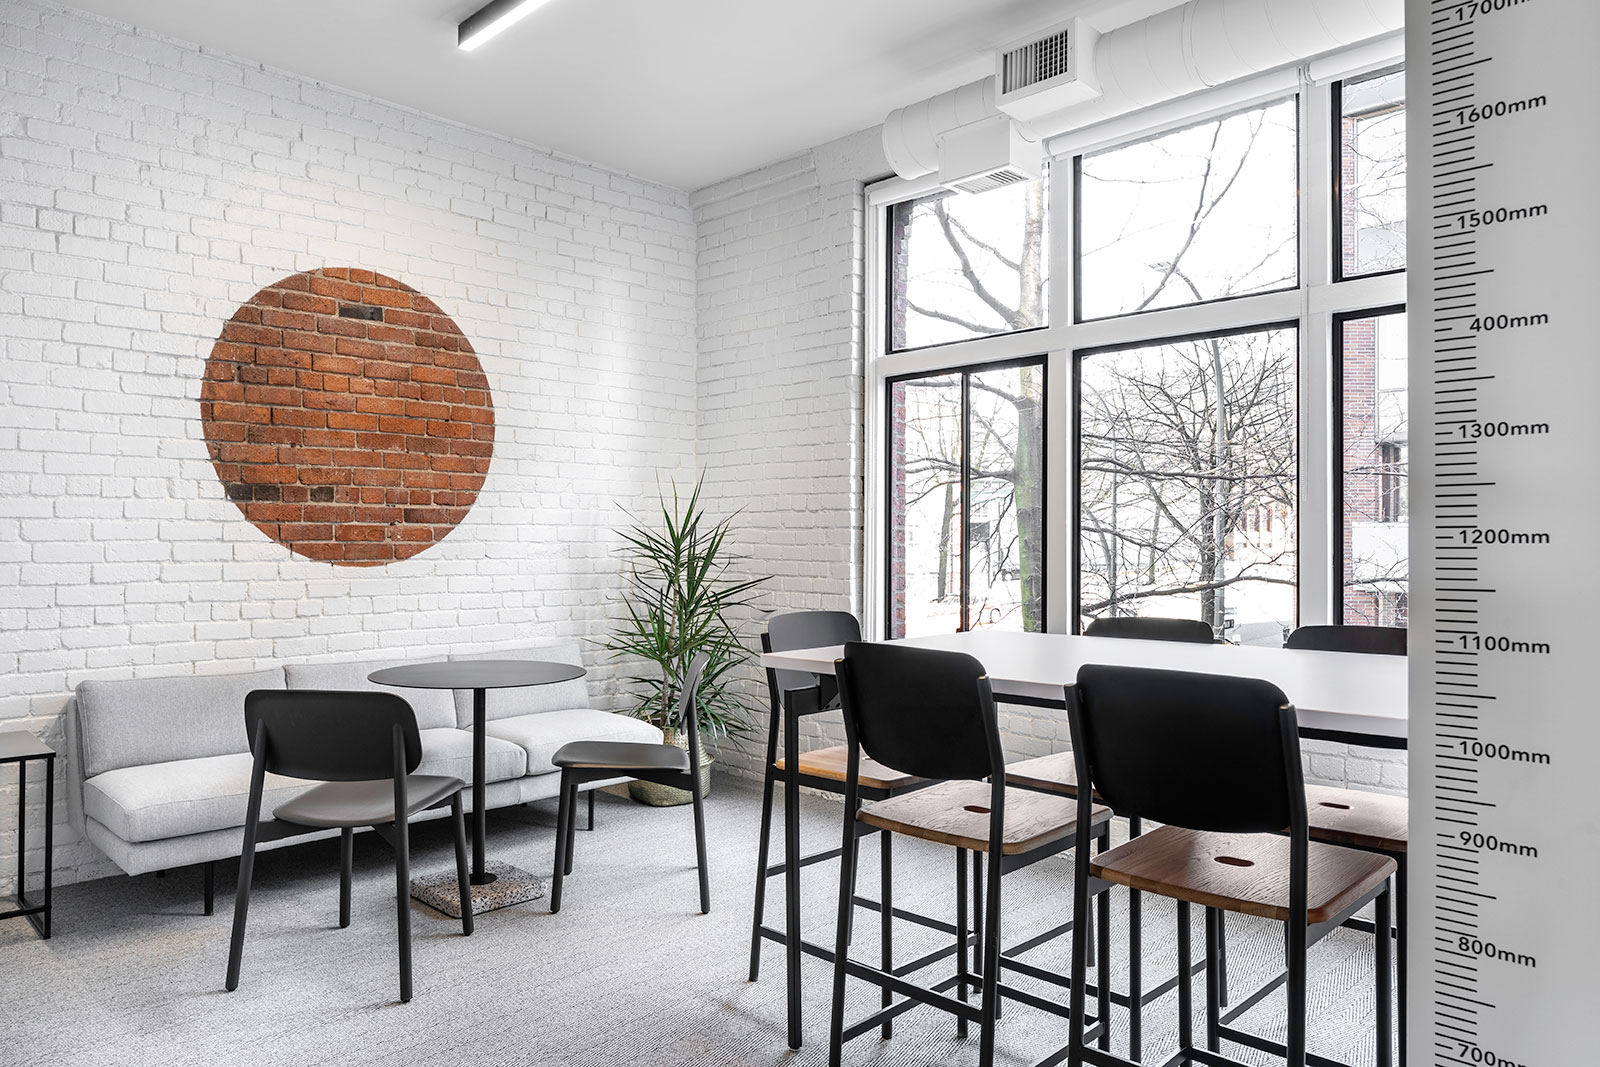 Cutler studio headquarters meeting room with white brick, big windows, couch and chairs